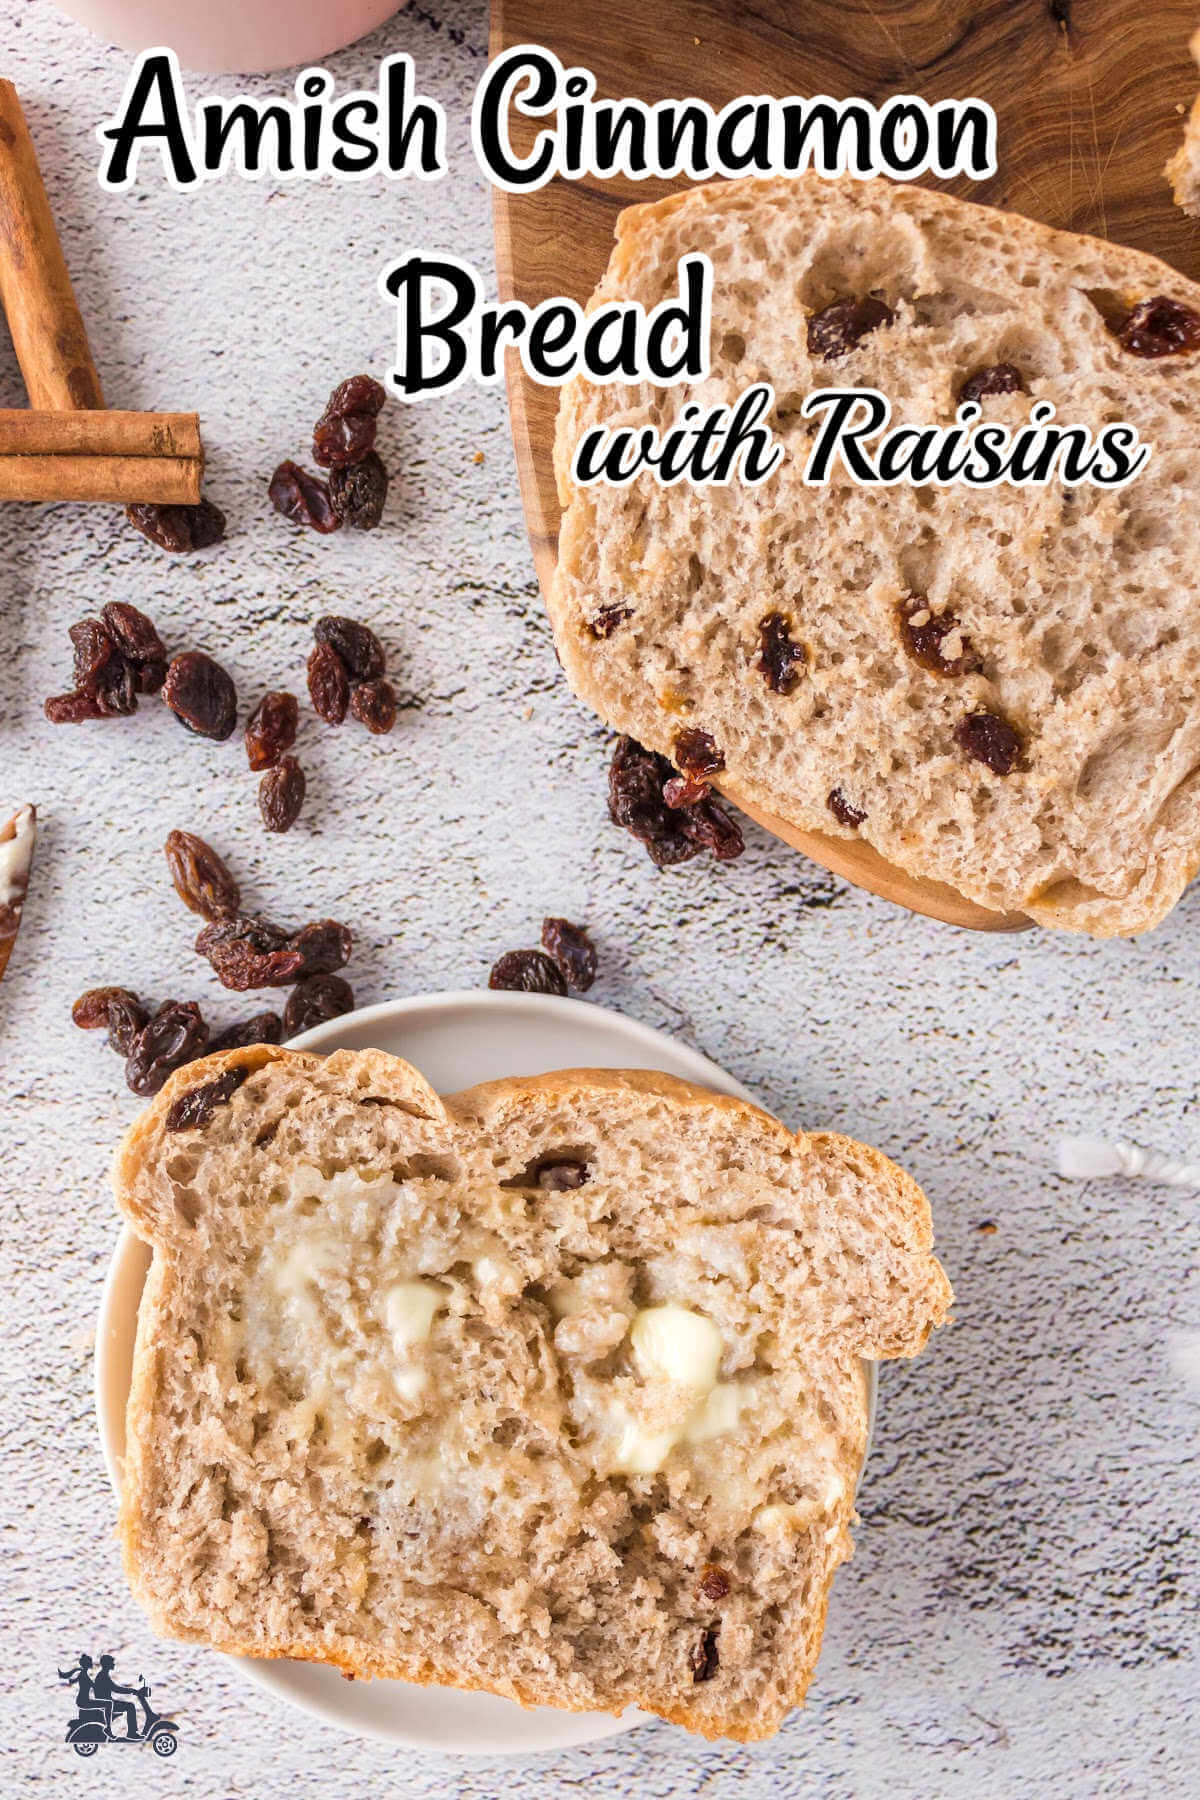 Amish Cinnamon Bread Recipe is a delicious moist breakfast bread filled with aromatic cinnamon and studded with raisins. A wonderful way to start the day with a slice or two of this easy to make homemade yeast bread. The cinnamon and raisins are added to the entire loaf of bread instead of just including them in the swirls. This is a family favorite you'll want to have on hand to enjoy either for breakfast or a snack.